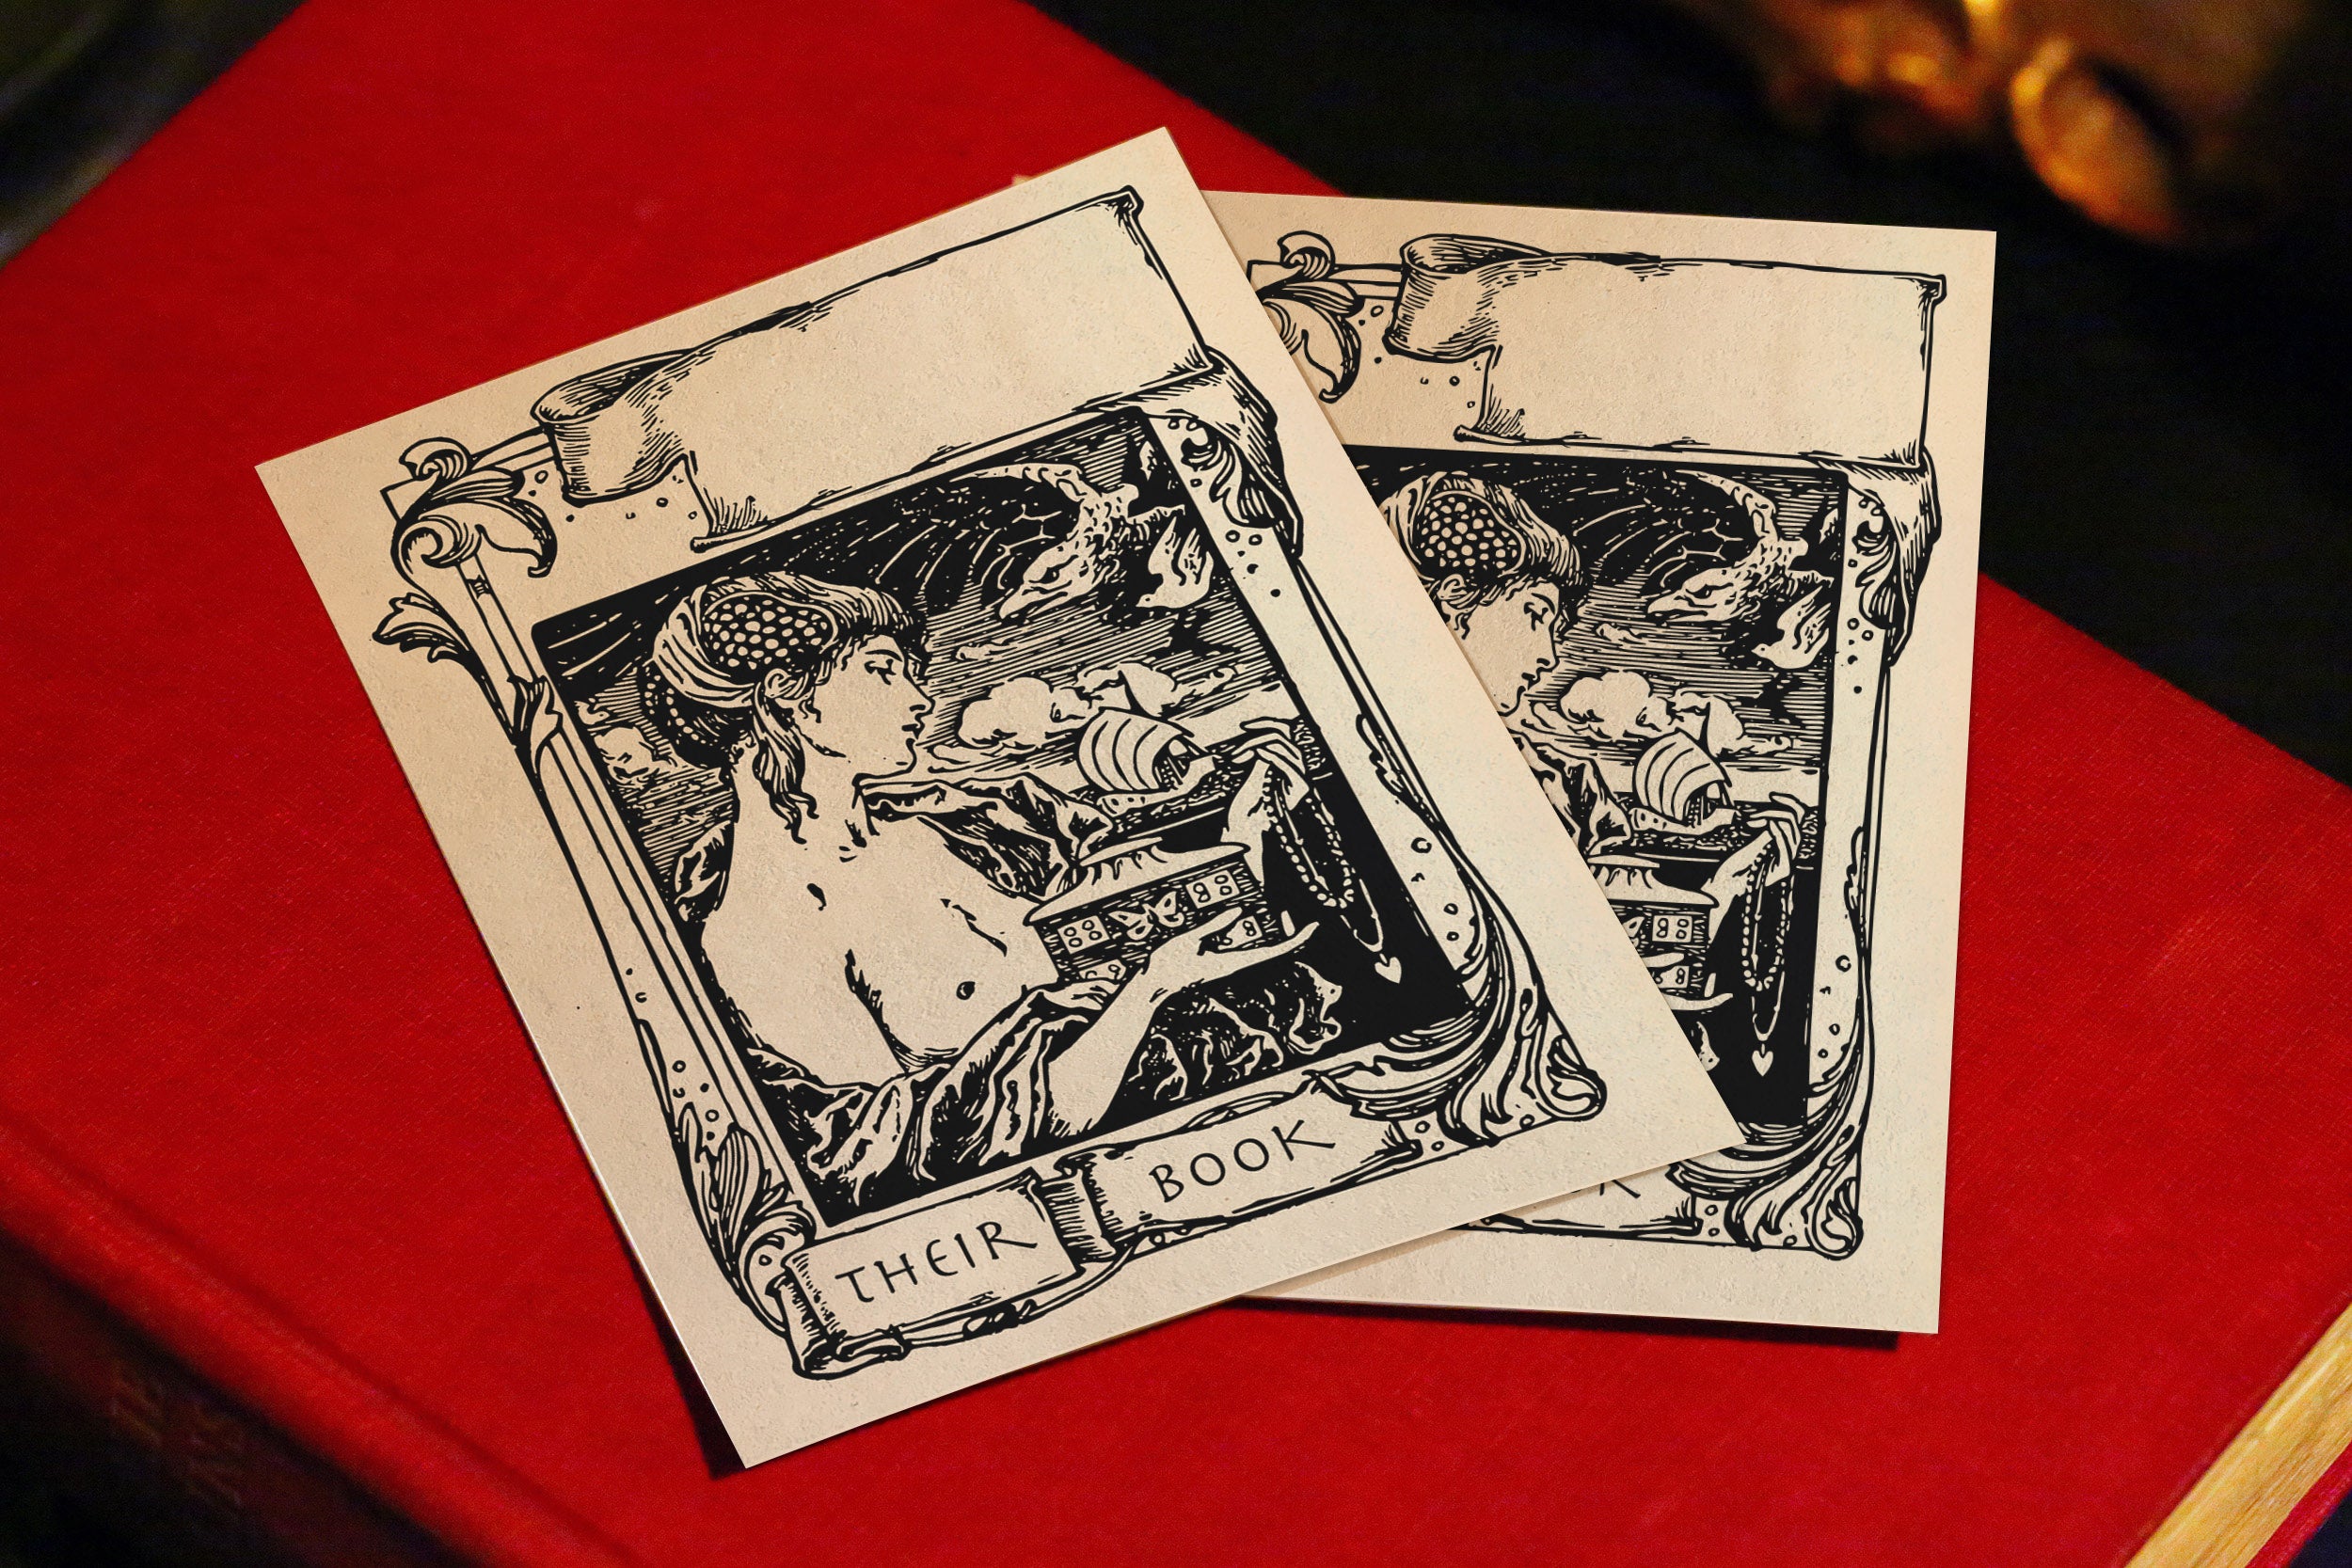 Pandora's Box, Personalized Ex-Libris Bookplates, Crafted on Traditional Gummed Paper, 3in x 4in, Set of 30